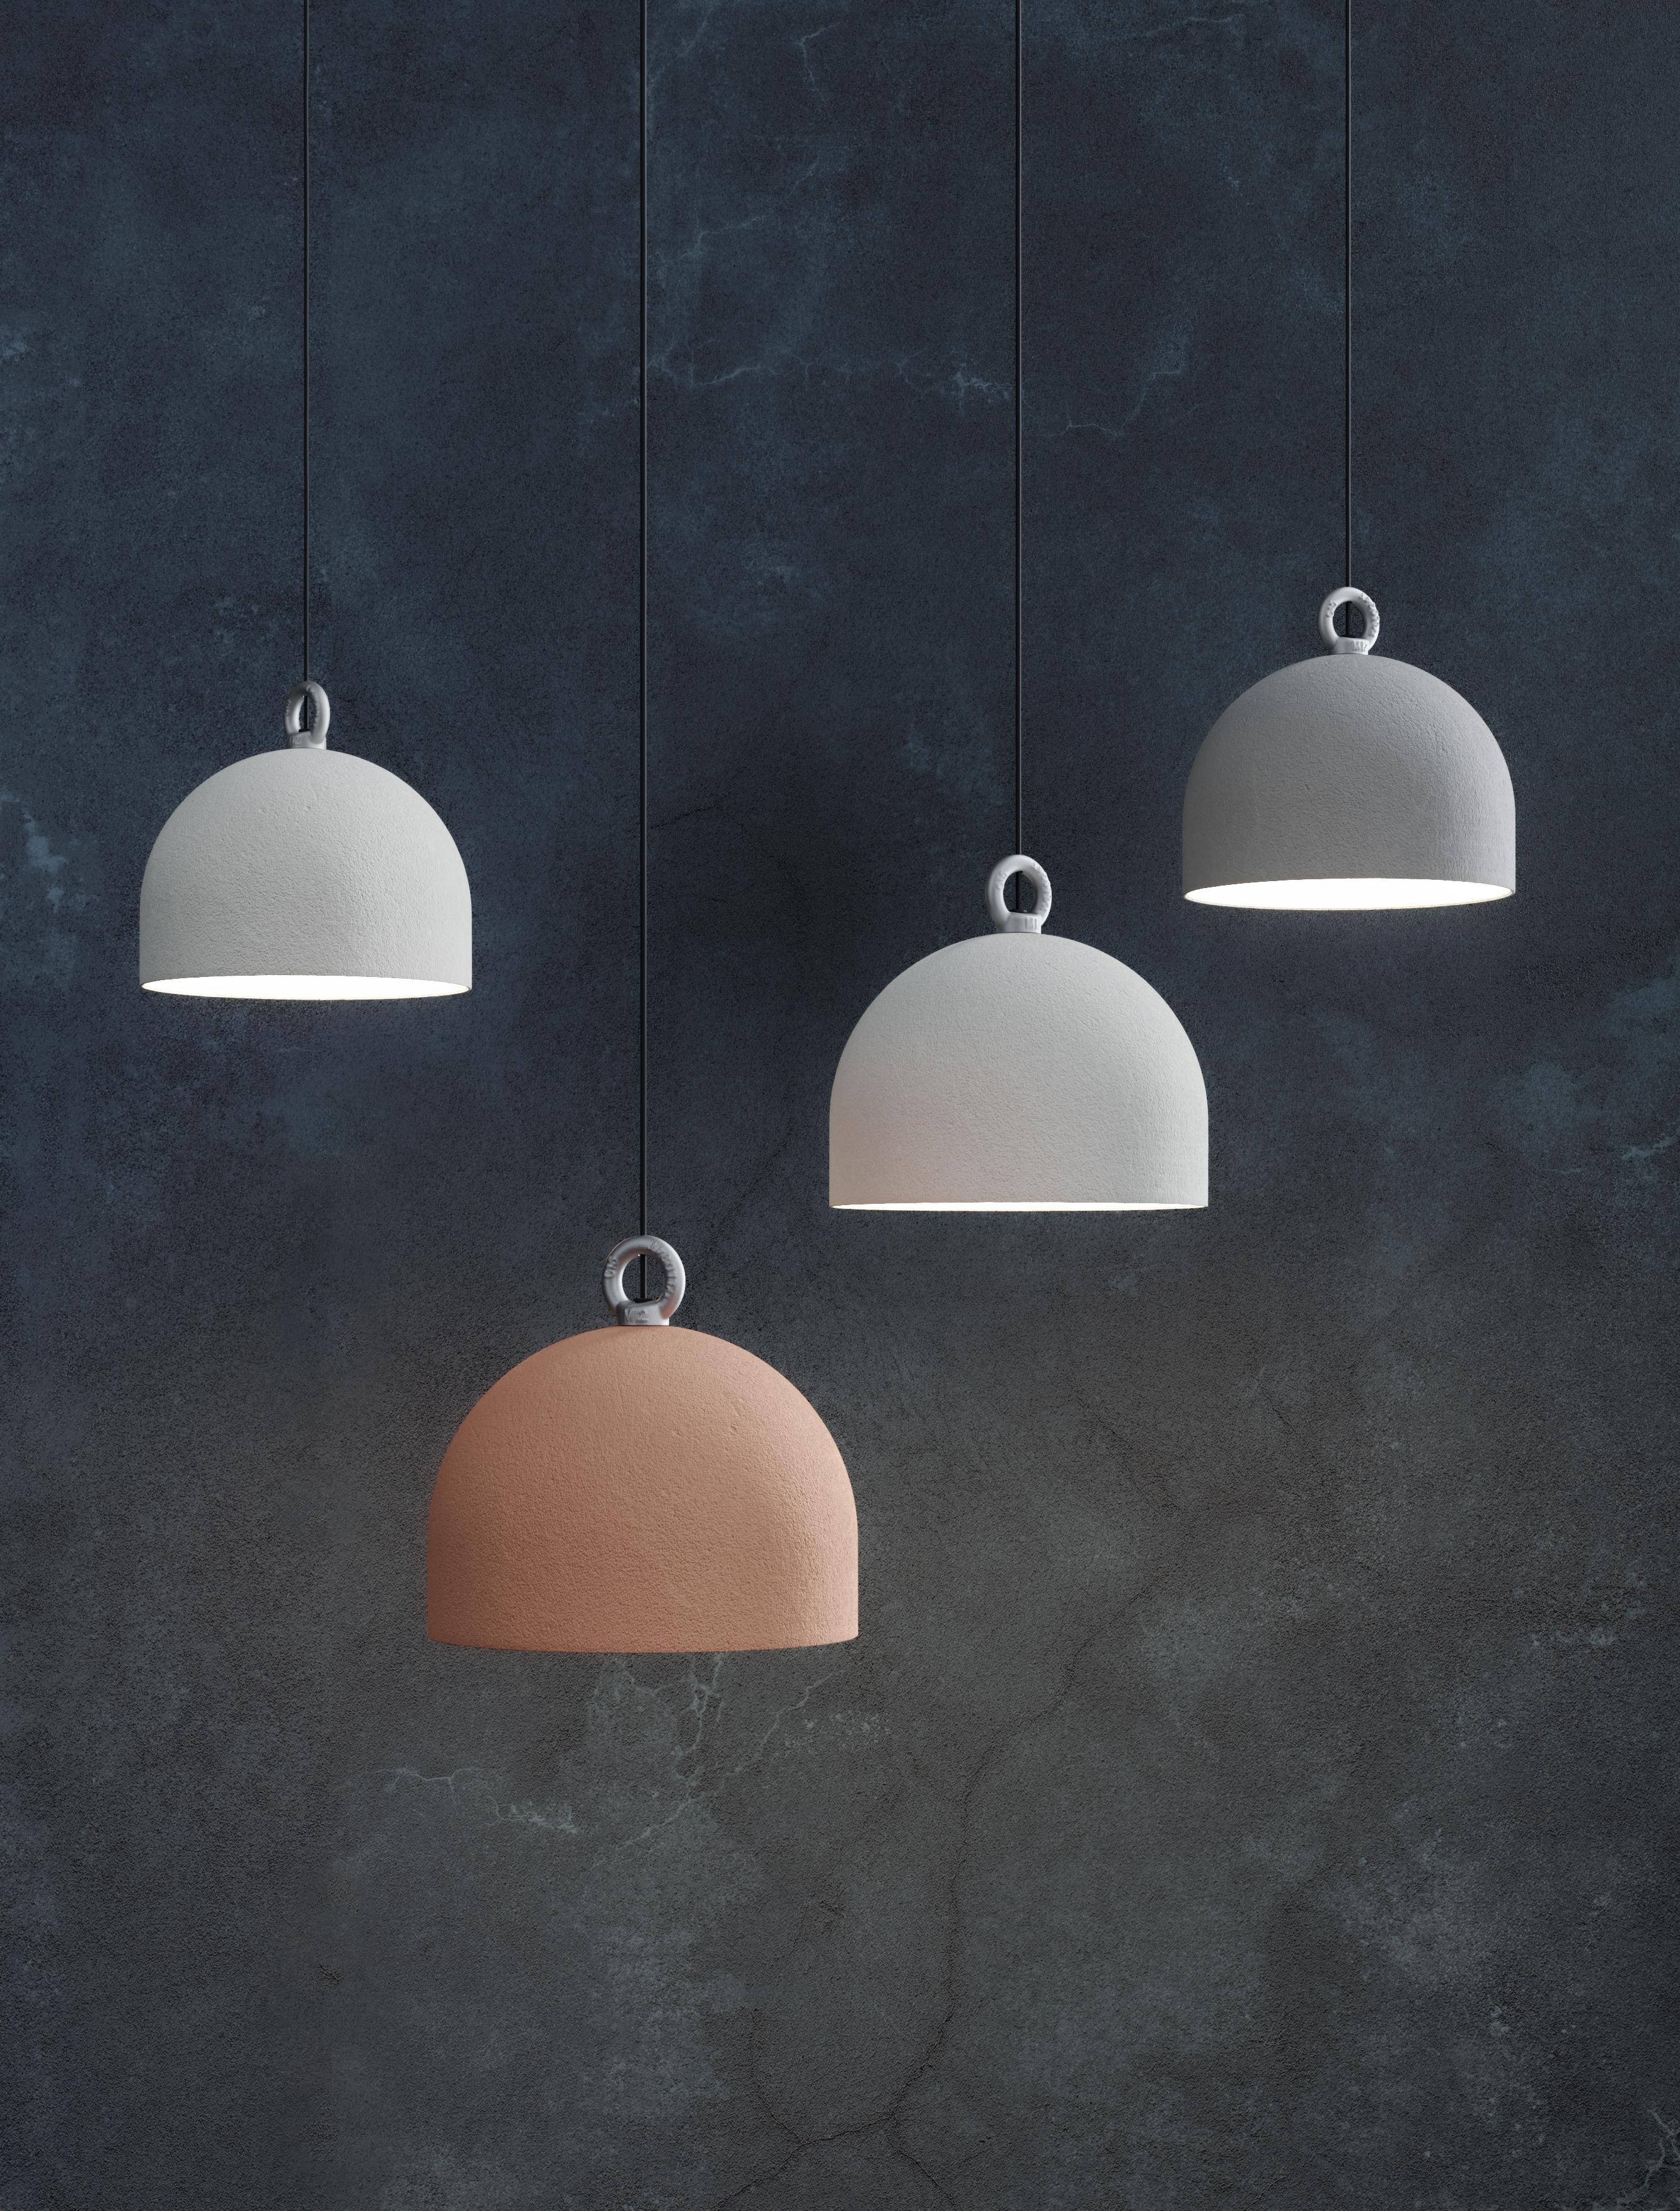 Taking inspiration from the bollards found in the urban landscape, Urban Concrete is a lighting piece balancing clean lines and solid surfaces with a dome crowned by a lifting hook.

Whilst the spun metal dome evokes a cement block and creates an